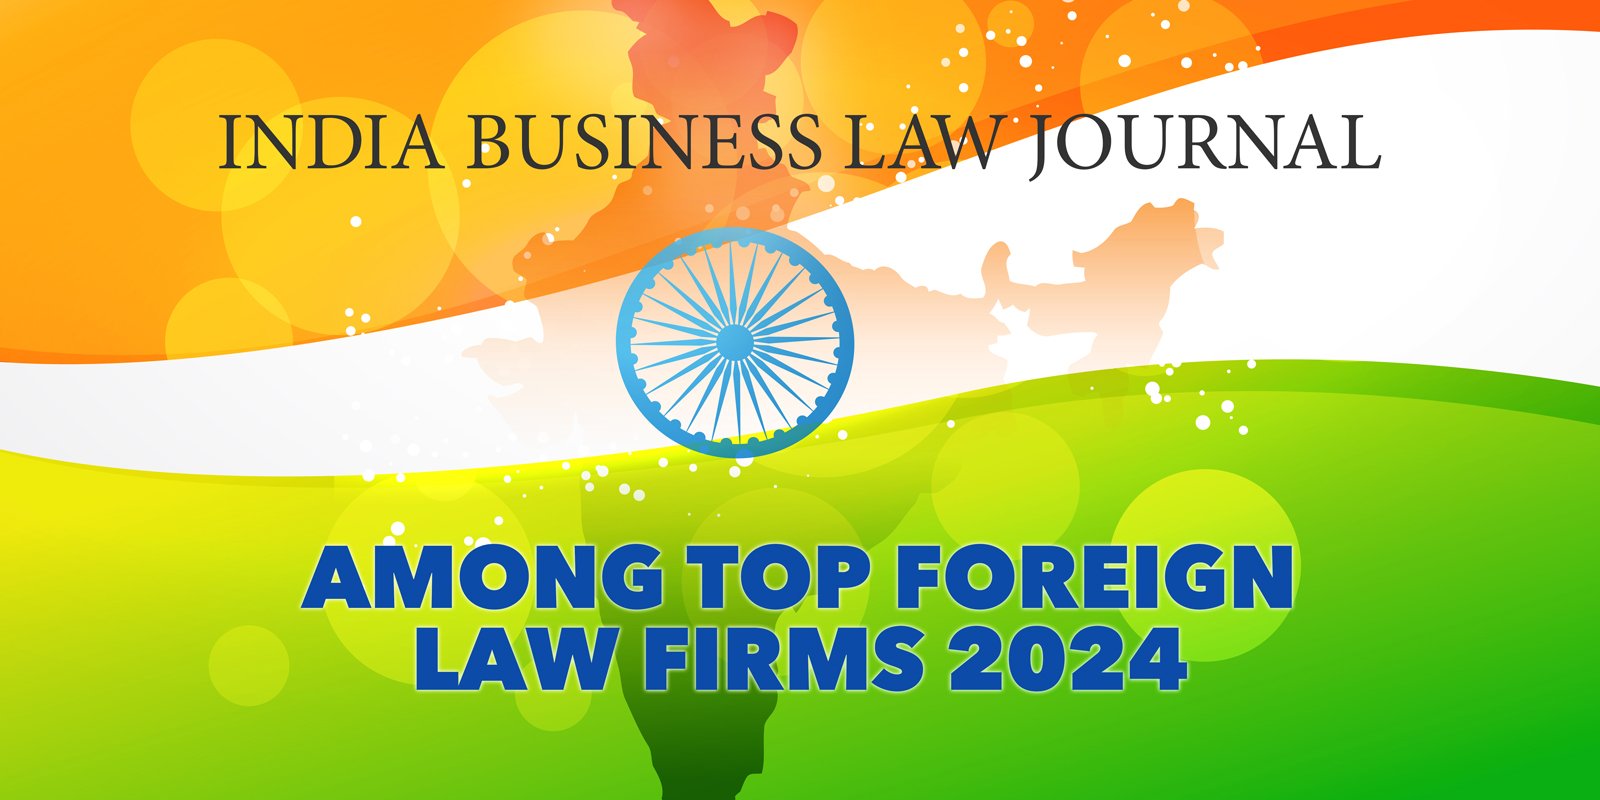 India Business Law Journals Top Foreign Law Firm